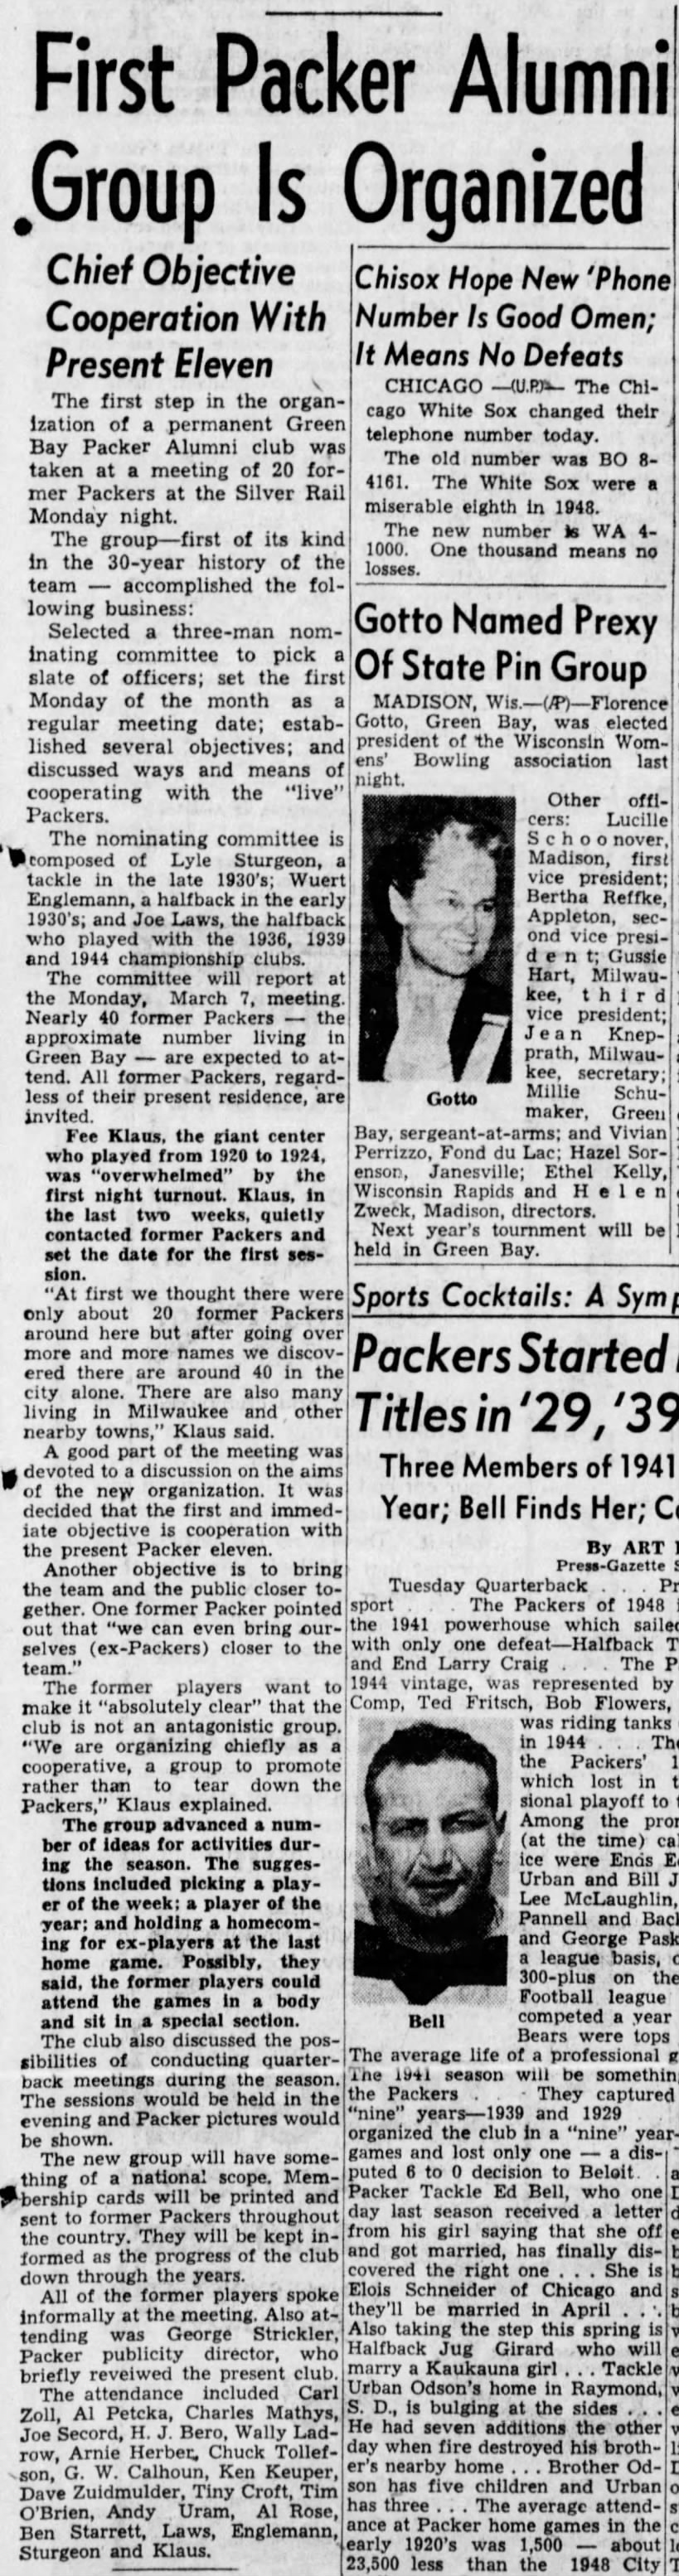 An article about the organization of the Green Bay Packers alumni club.